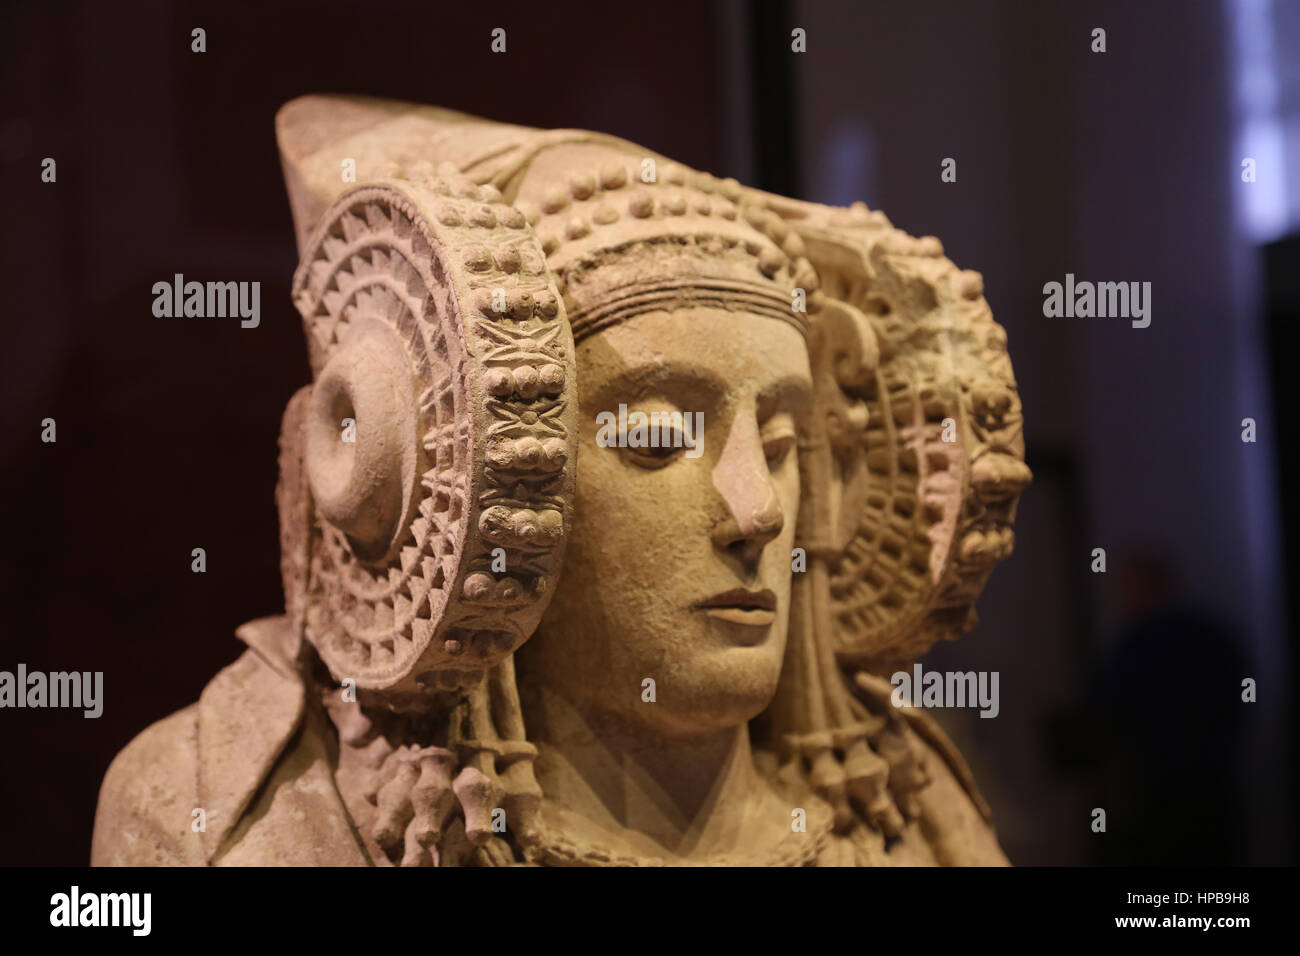 Lady of Elche. Funerary urn. 4th century BC. From l'Alcudia. Iberian sculpture. Woman wearing a complex headdress and large wheel-like coils. Stock Photo